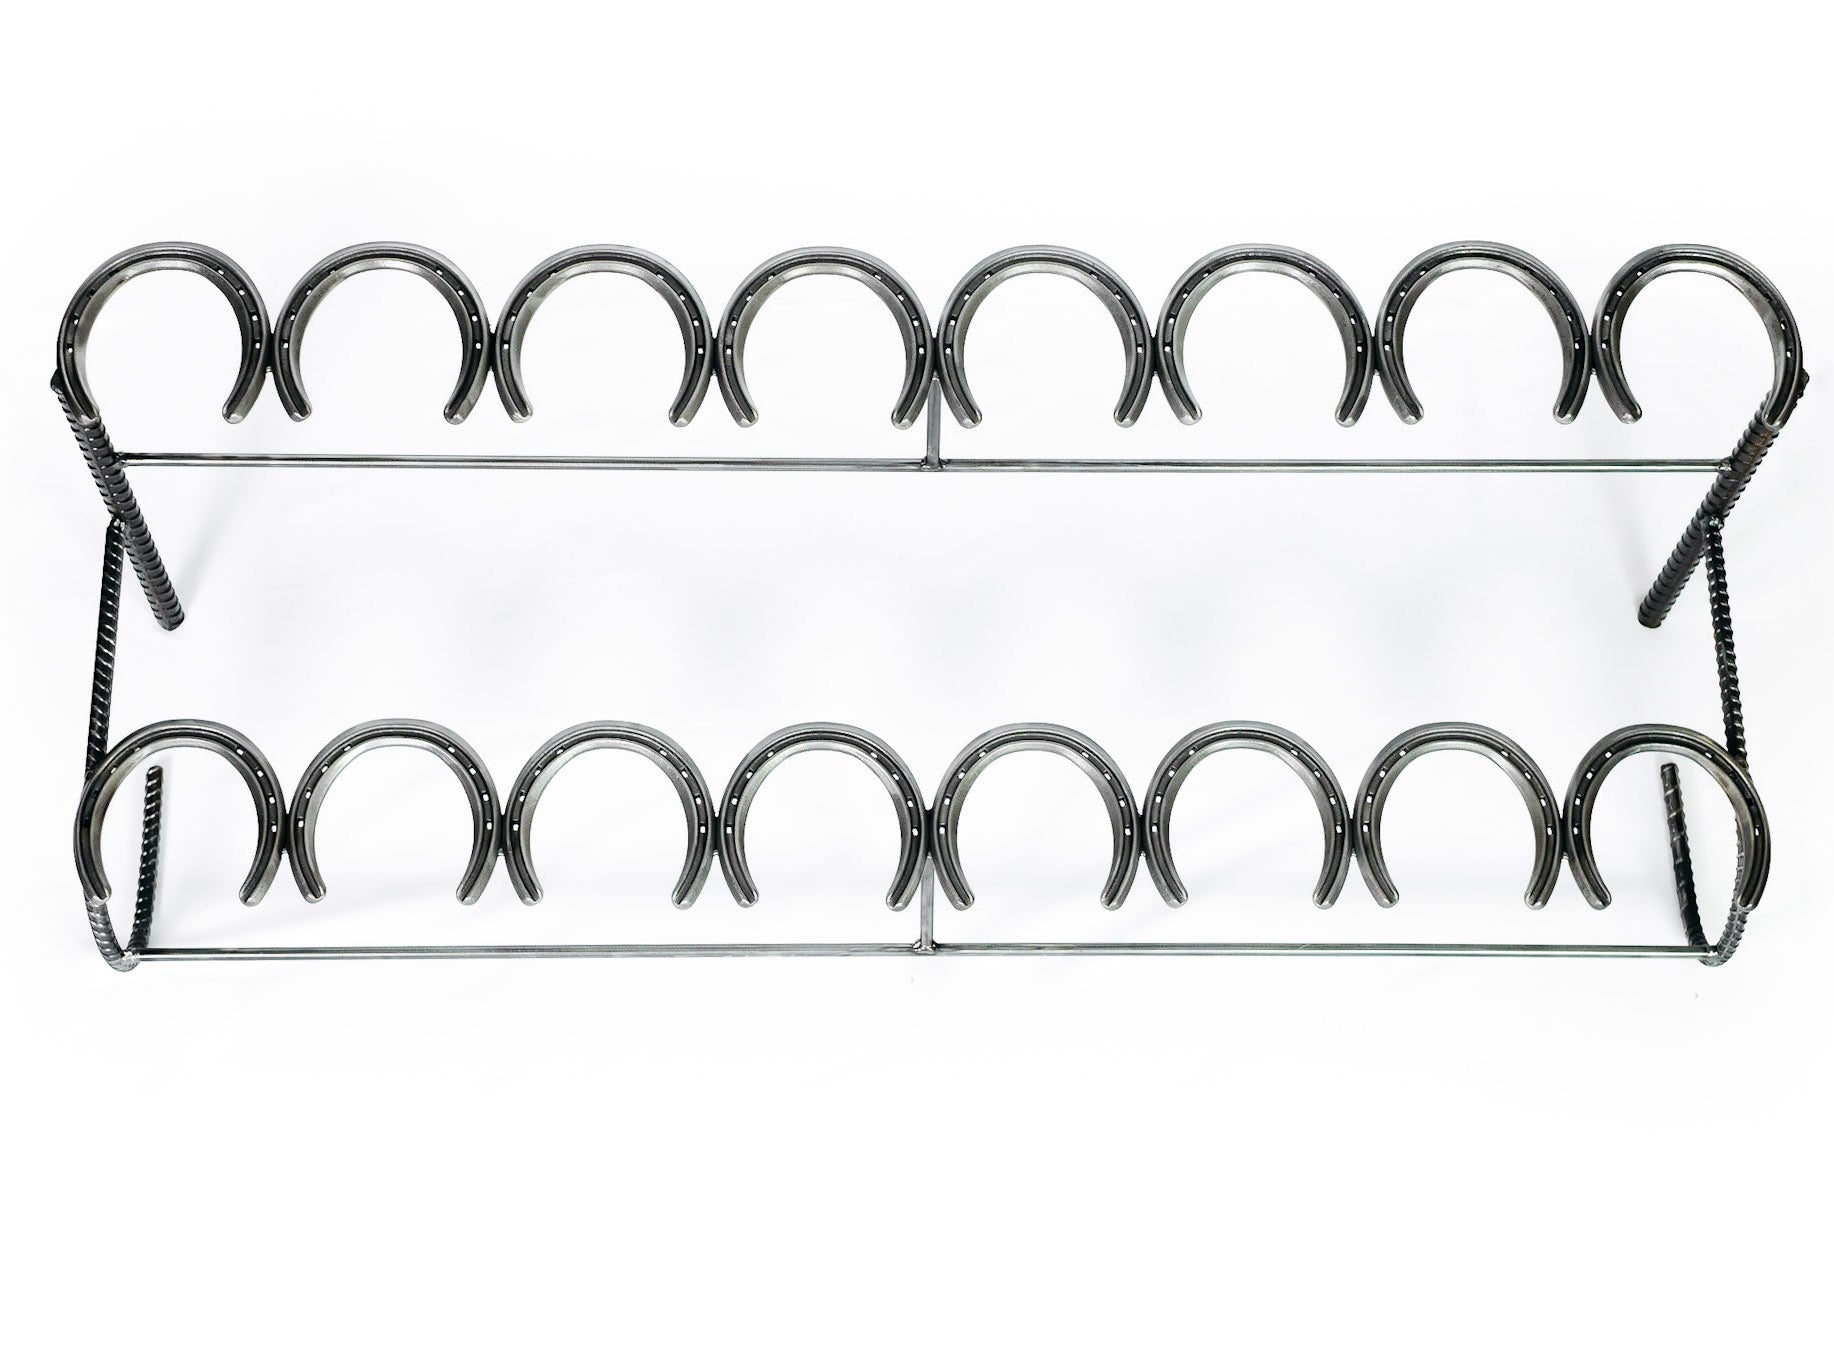 Rustic Double Decker Horseshoe Boot Rack - 8 pairs - The Heritage Forge